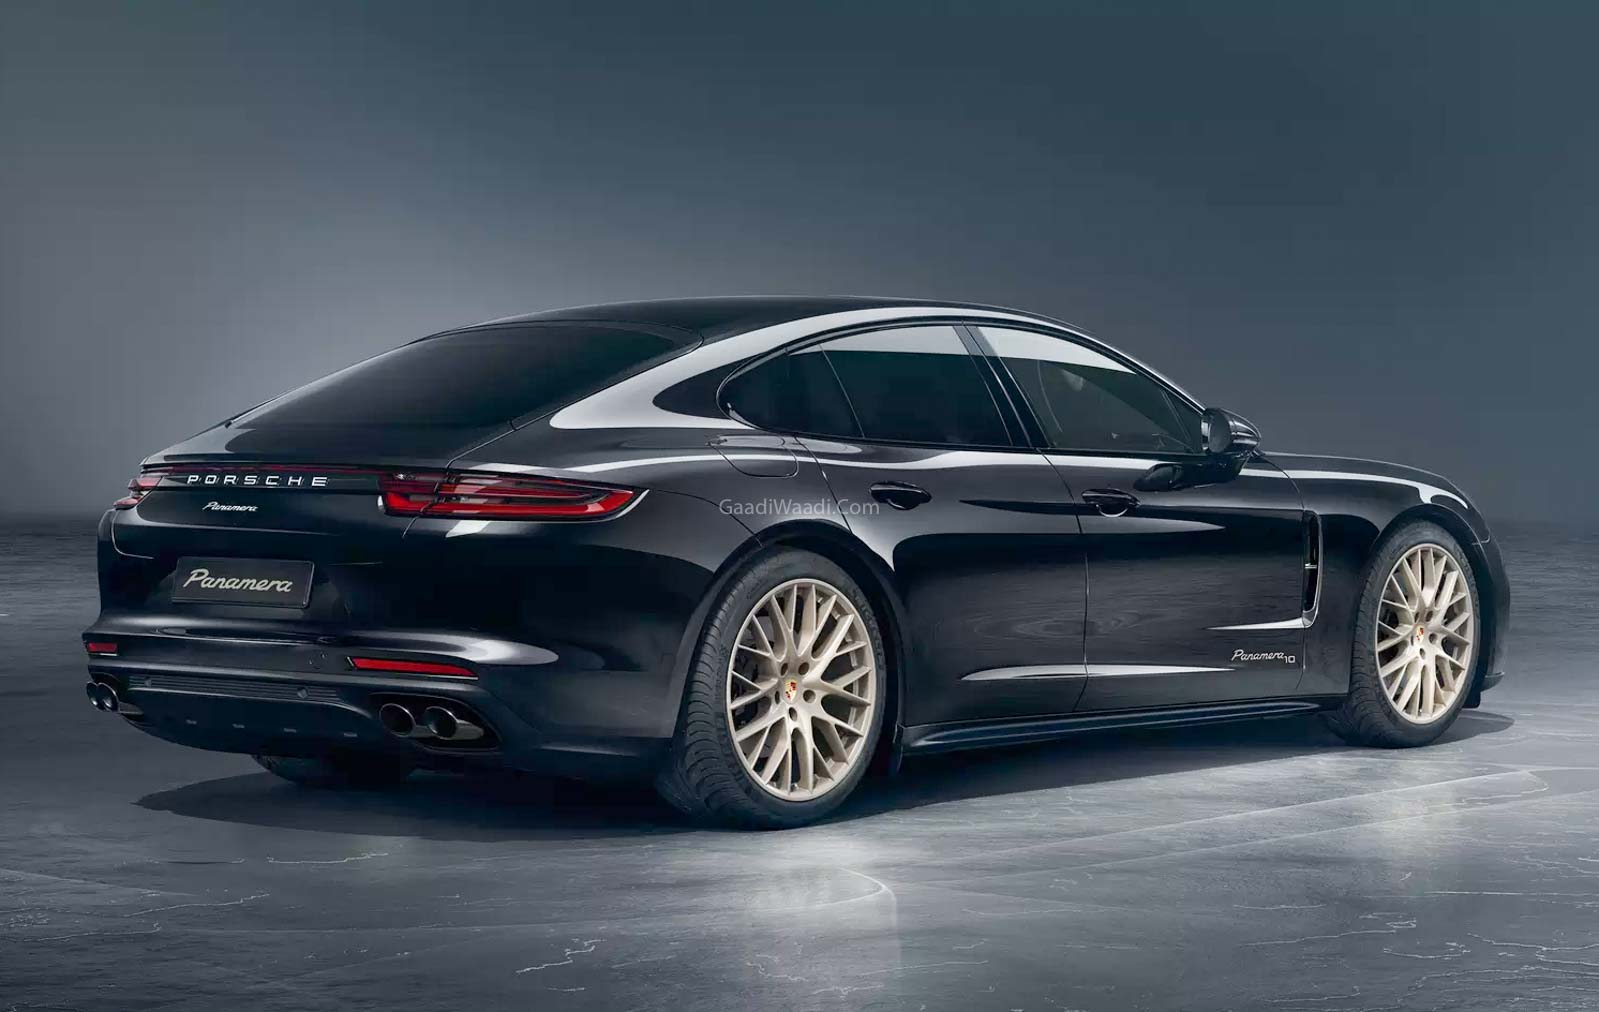 Porsche Panamera 4 10 Years Edition Introduced At Rs 1.6 Crore In India